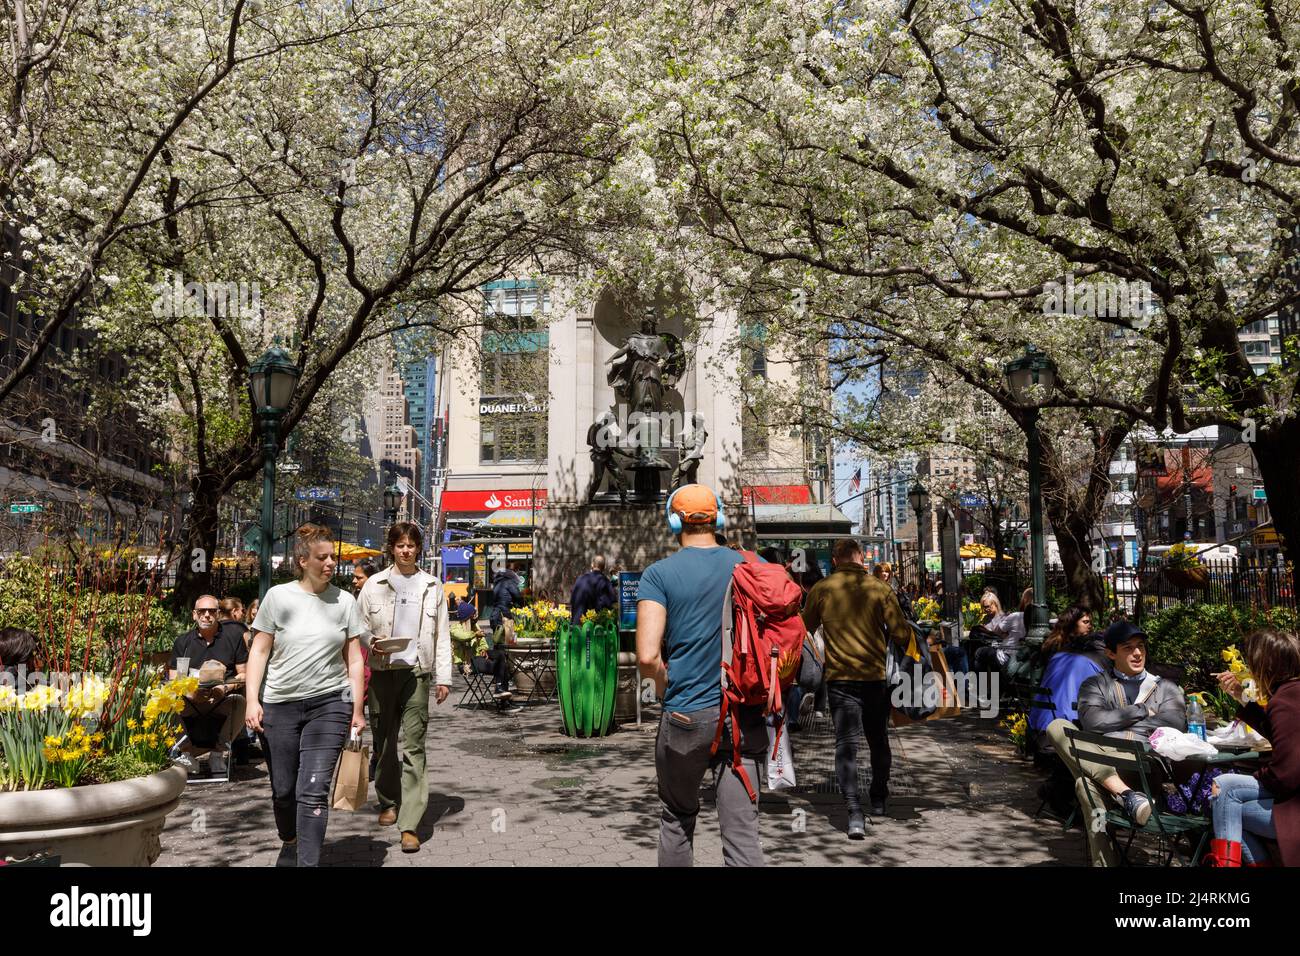 Herald Square in Spring is filled with flowering trees, midtown, New York, NY, USA. Stock Photo